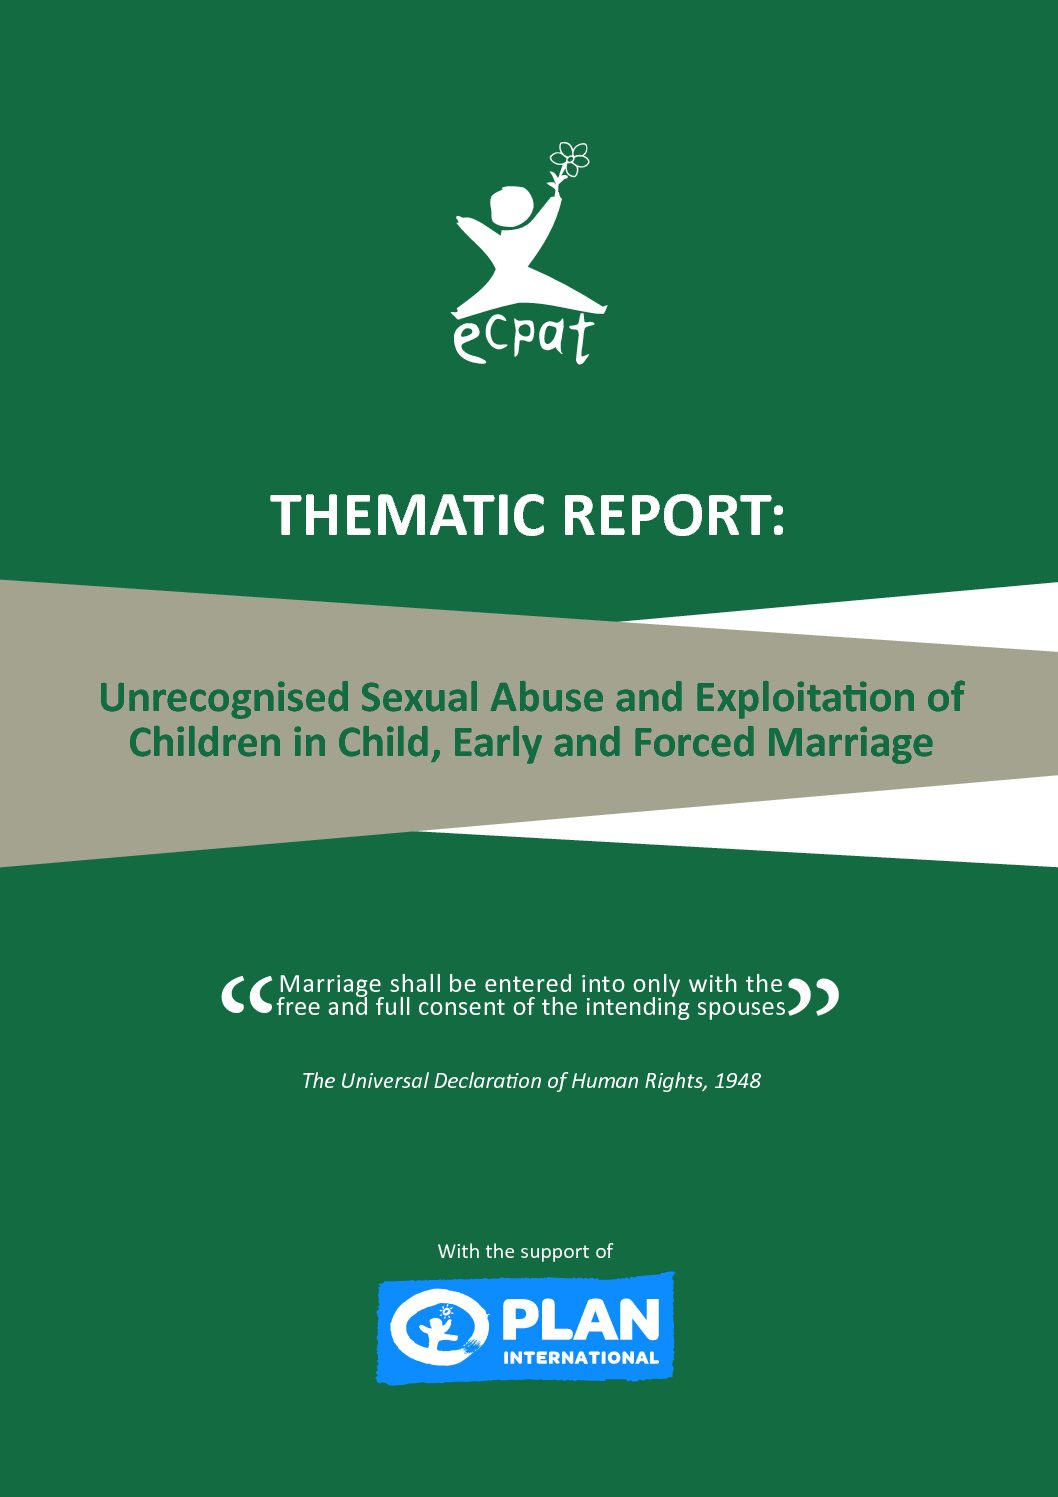 Thematic Report: Unrecognized Sexual Abuse and Exploitation of Children in Child, Early and Forced Marriage